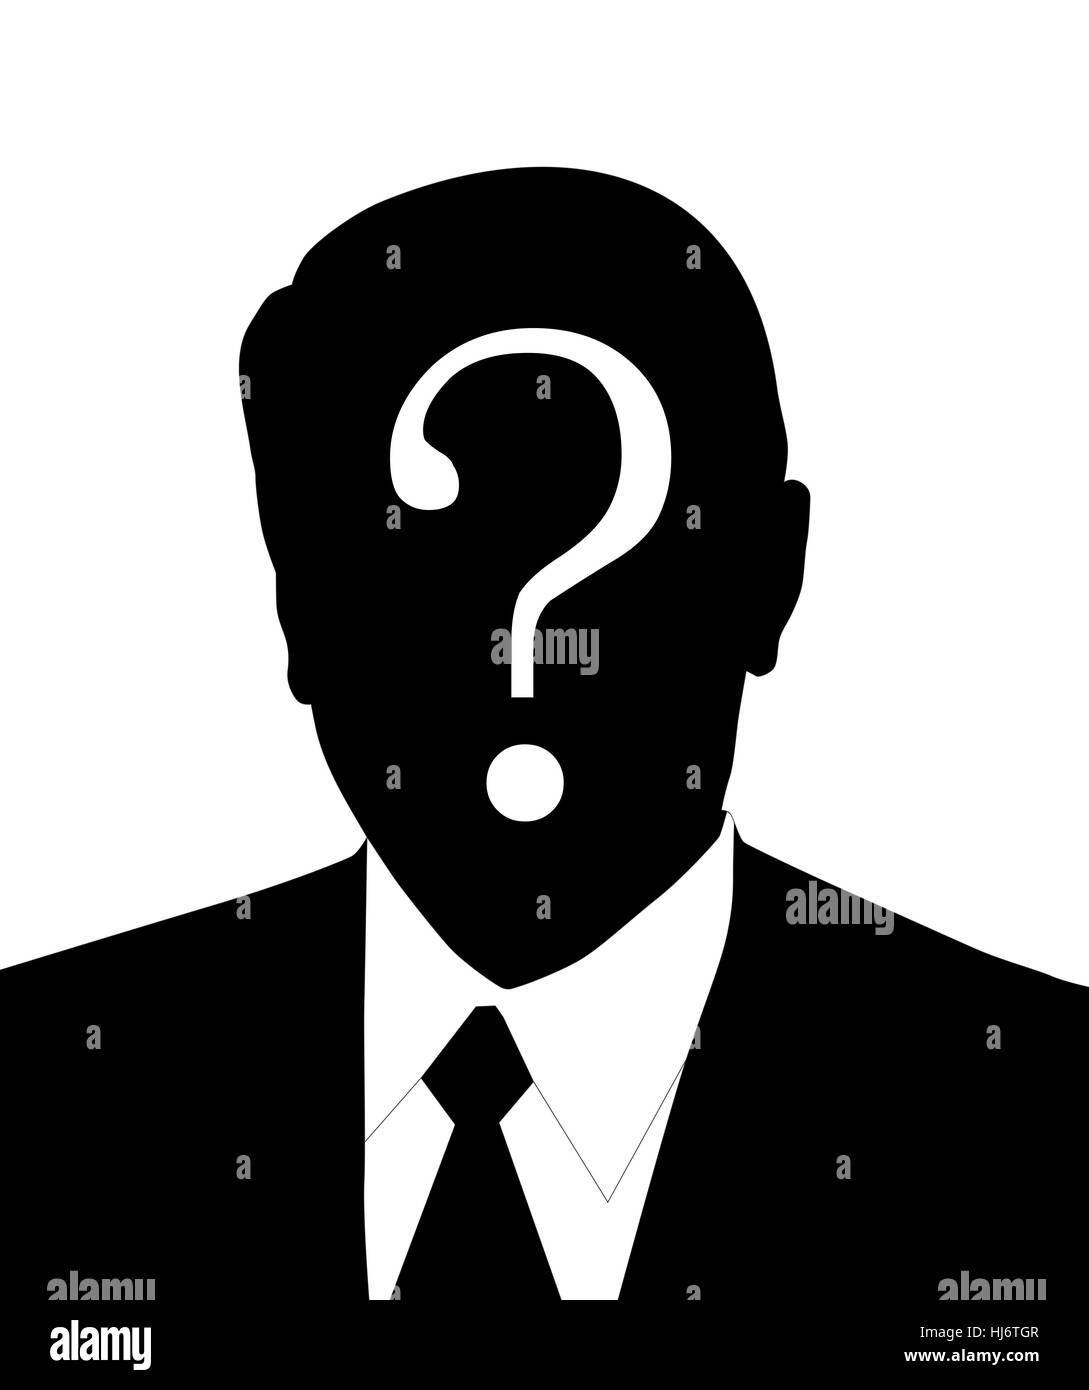 face, portrait, anonymous, mark, query, asked, ask, question, demand, john  Stock Photo - Alamy